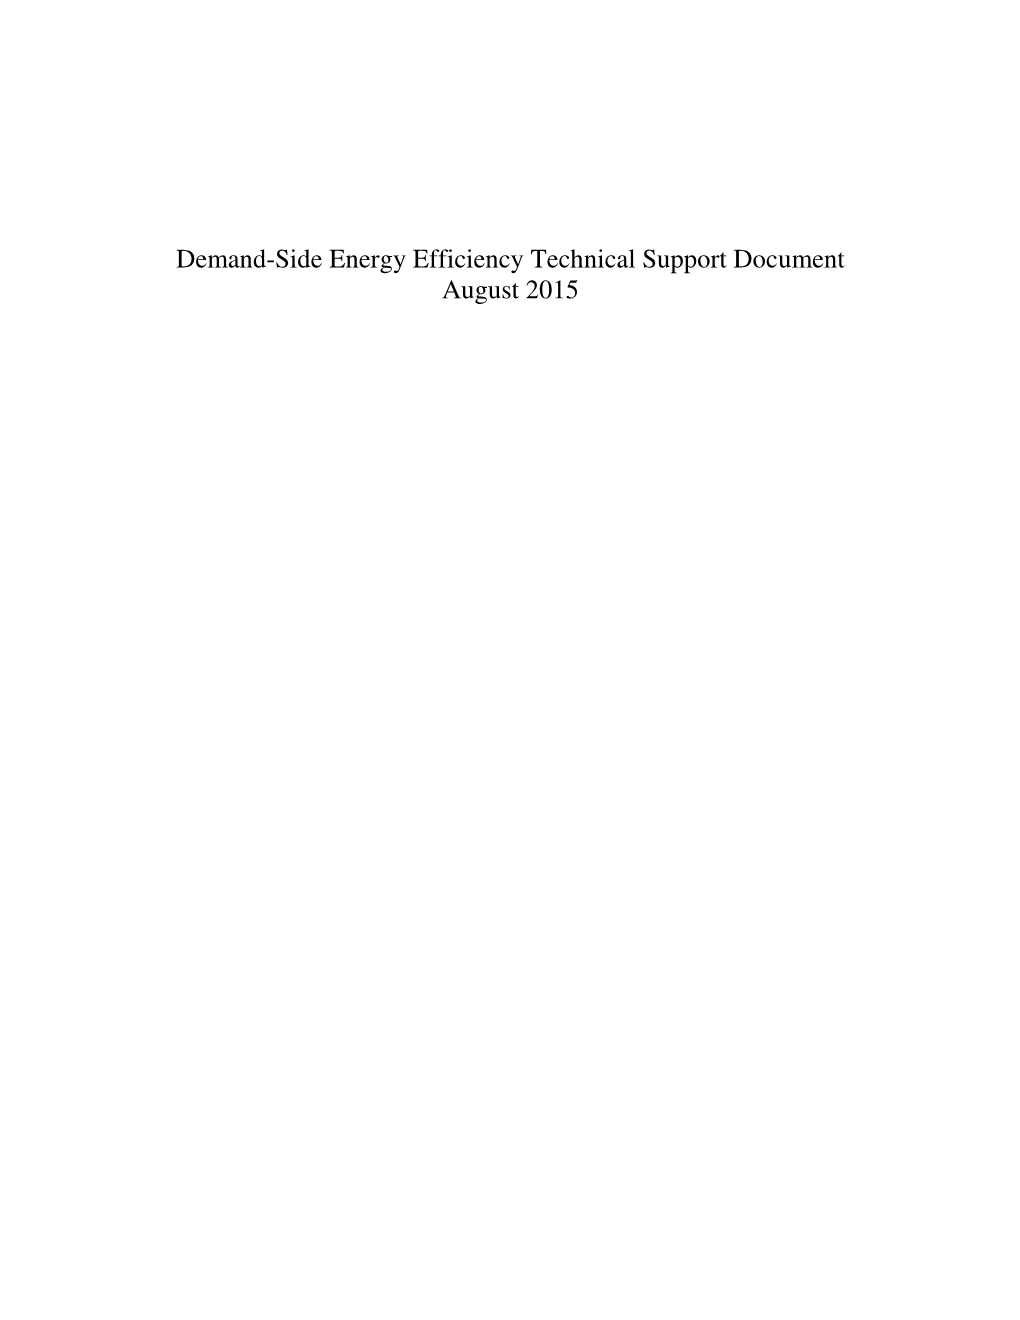 Demand-Side Energy Efficiency Technical Support Document August 2015